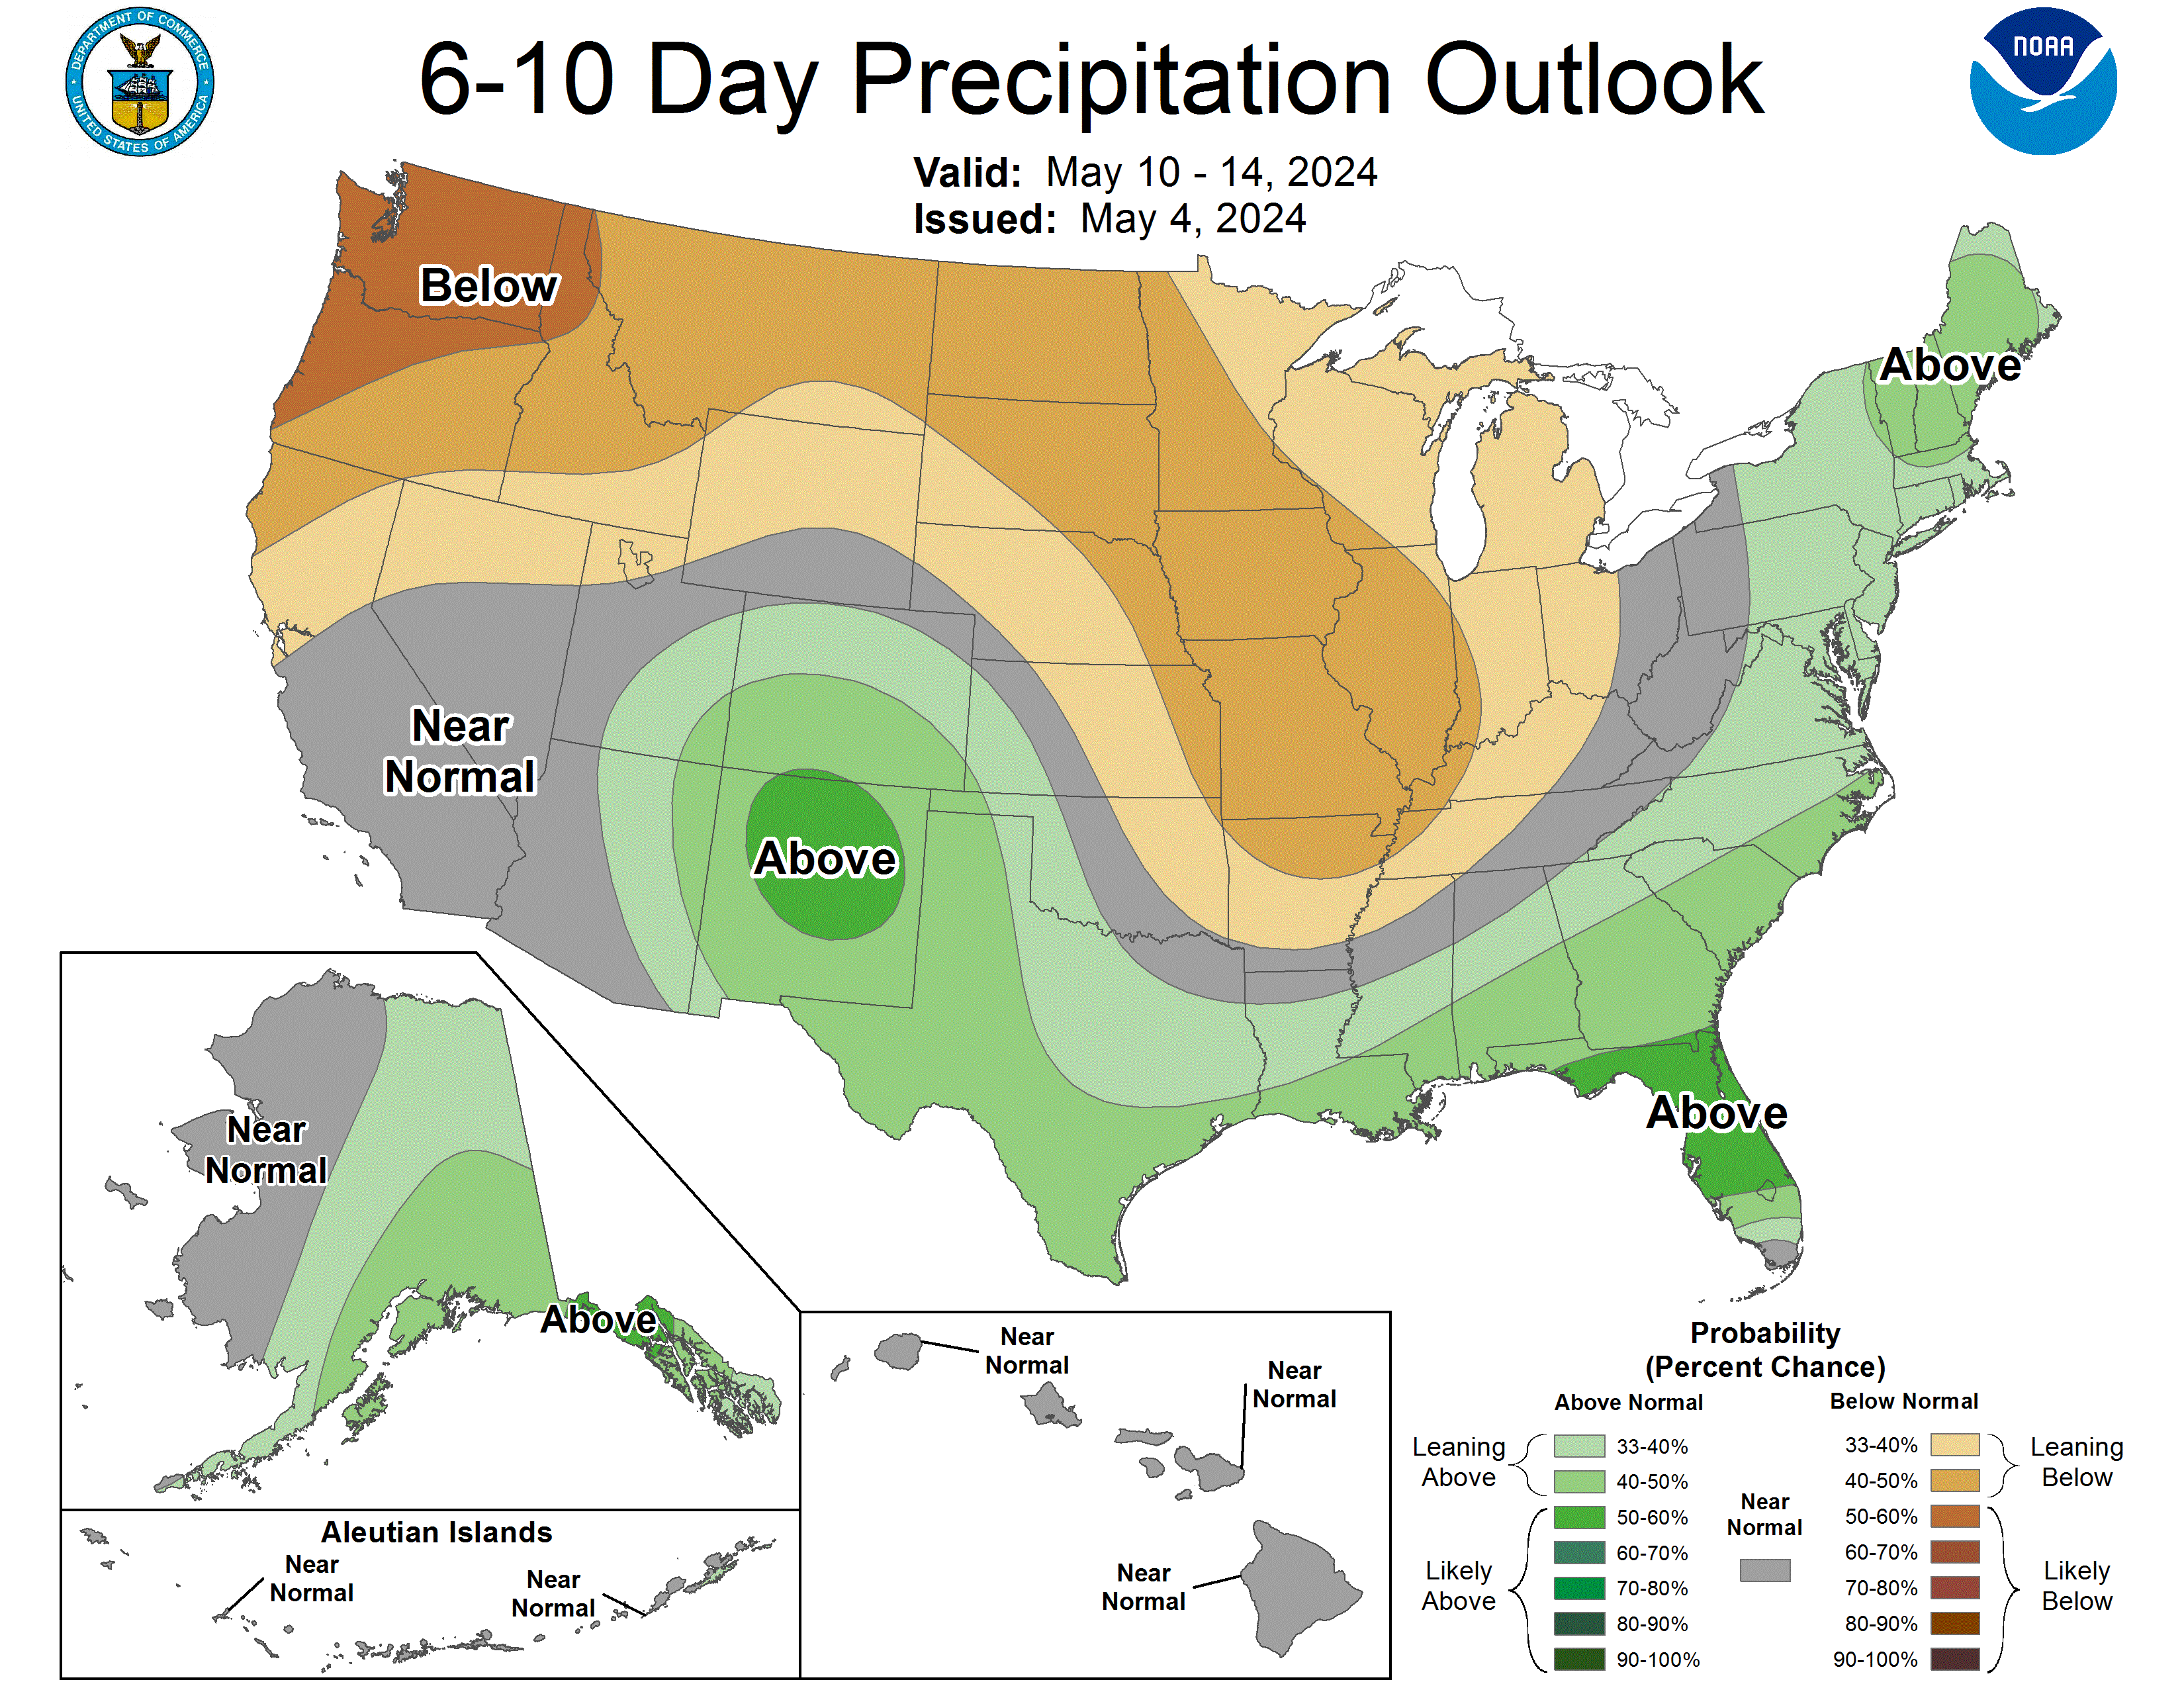 6 to 10 Day Outlook - Precipitation Probability